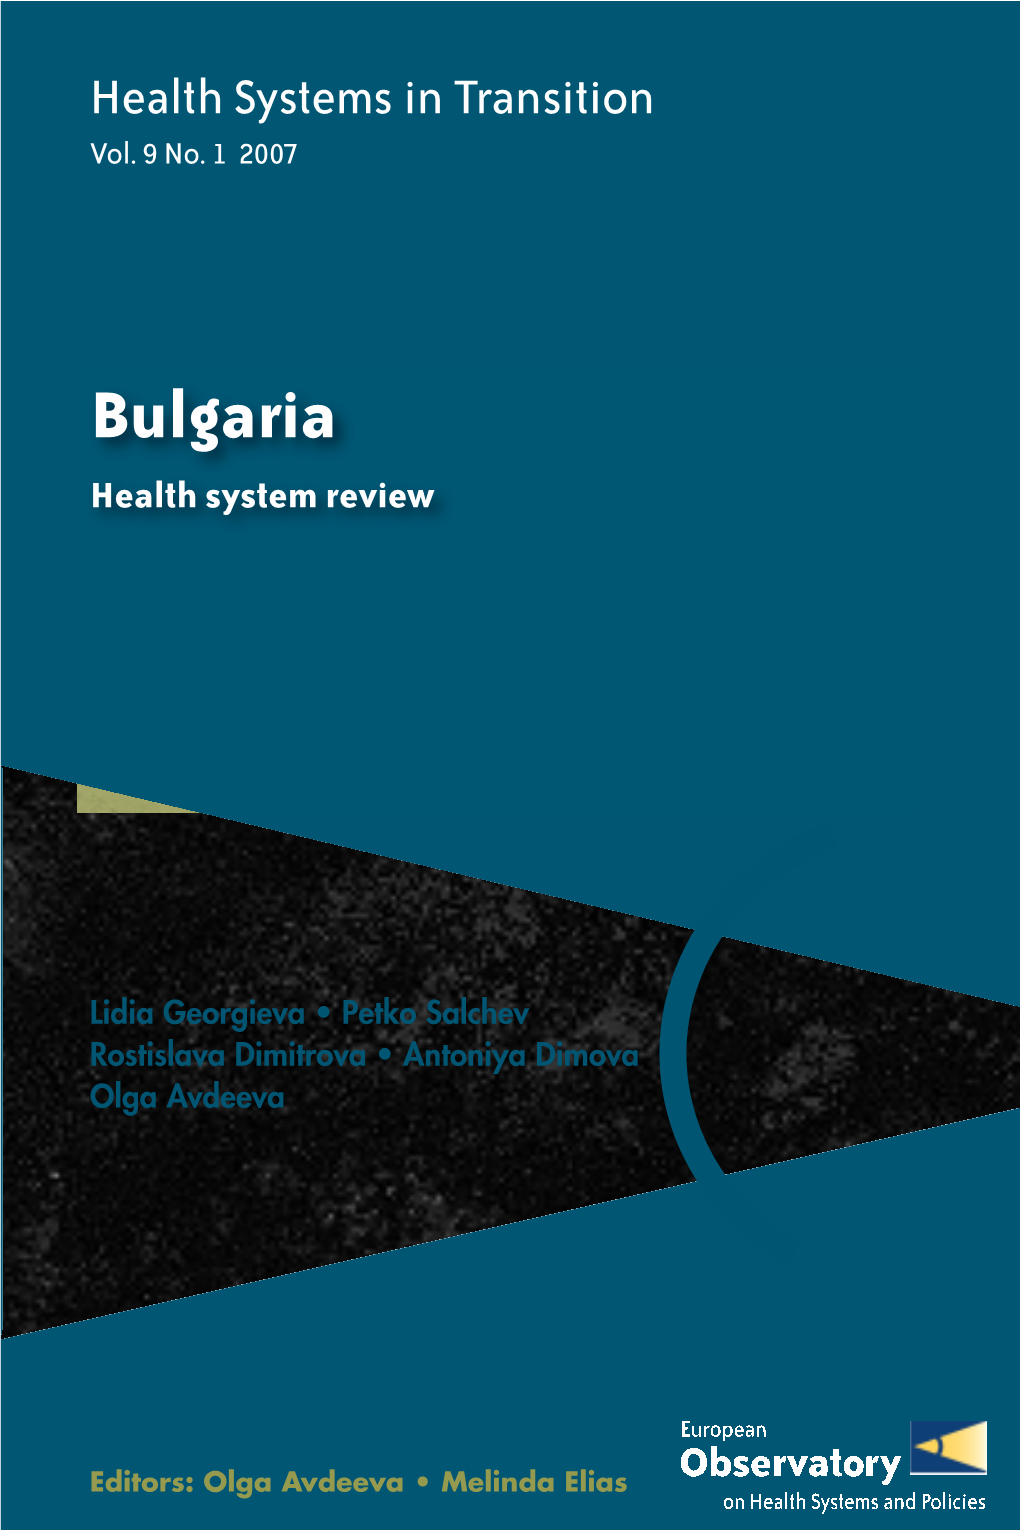 Bulgaria: Health System Review 2007